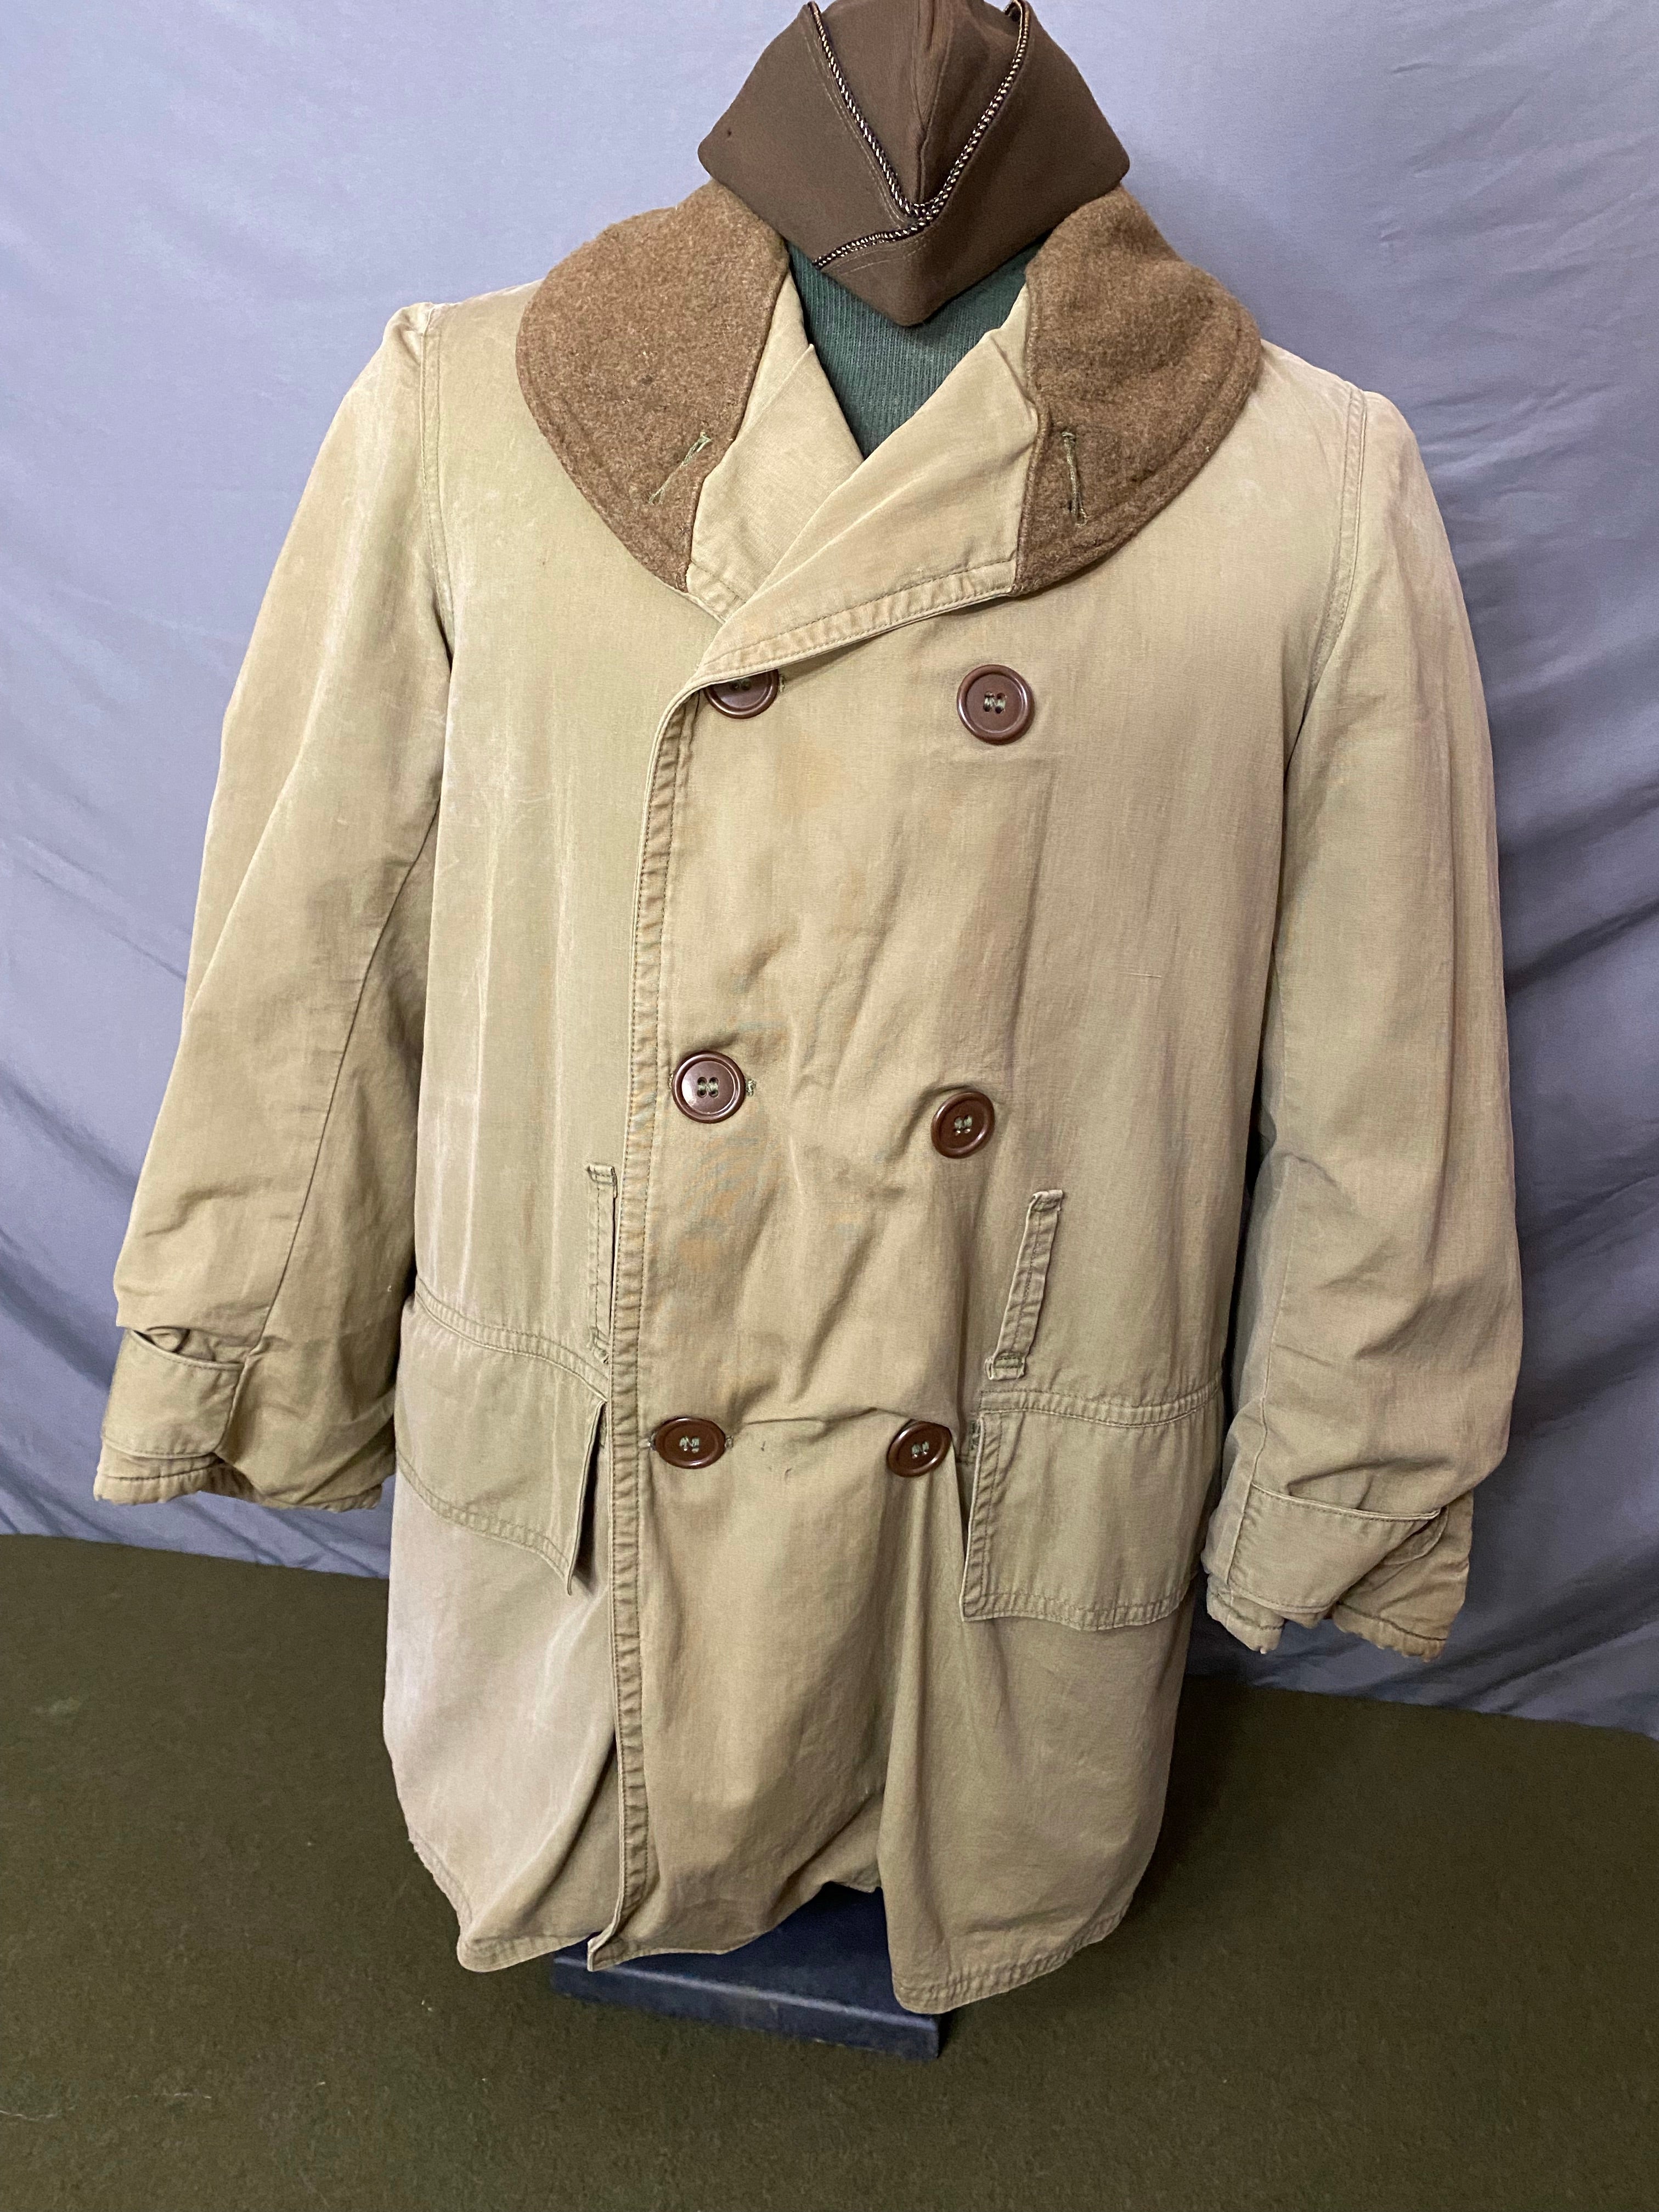 WWII Officers Mackinaw Jeep Jacket – Mail call militaria